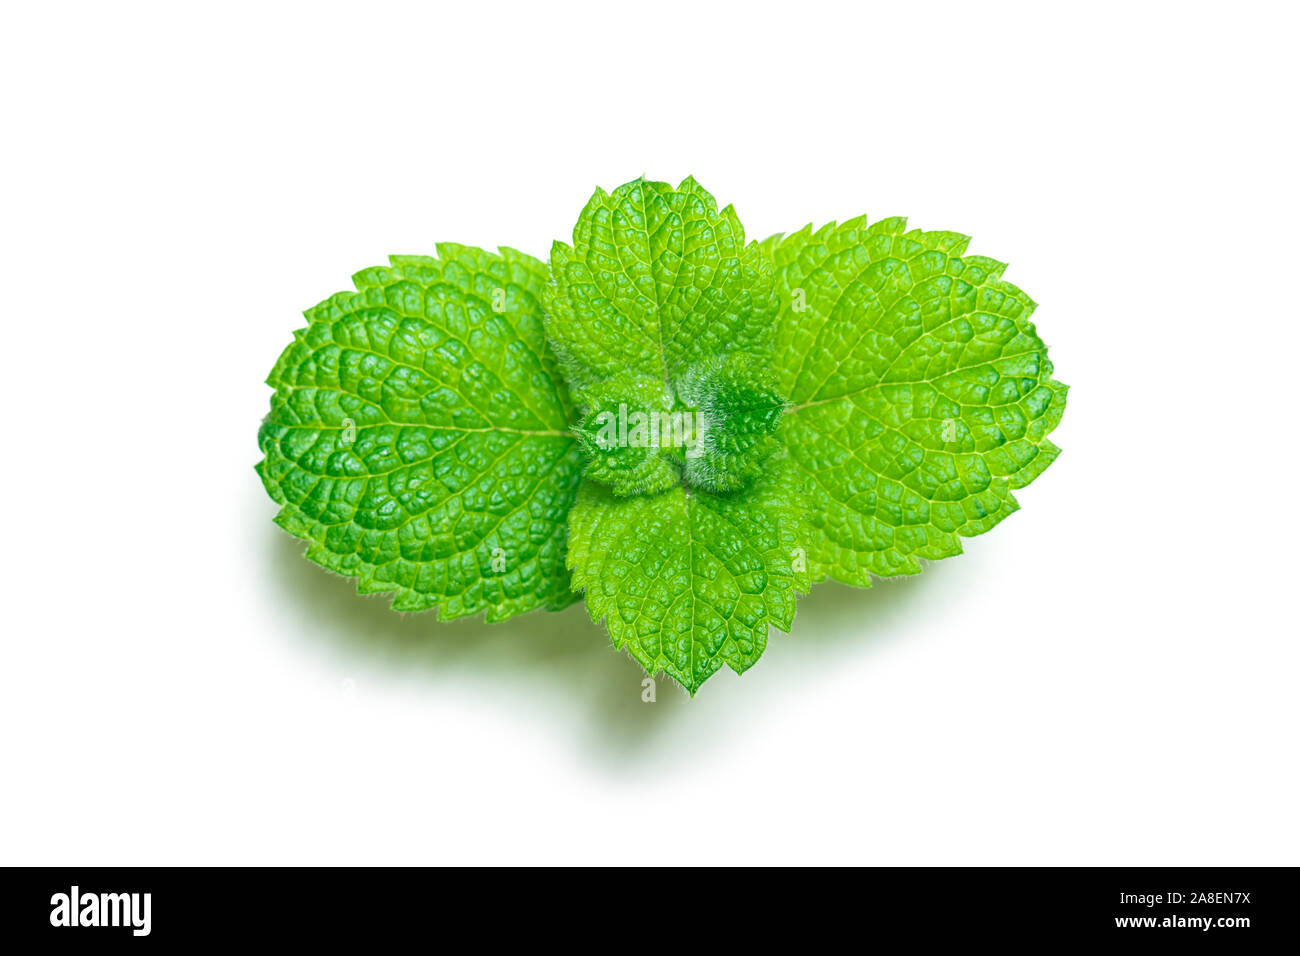 Peppermint mint twig isolated on white background. Herbal spearmint aromaingredient Stock Photo